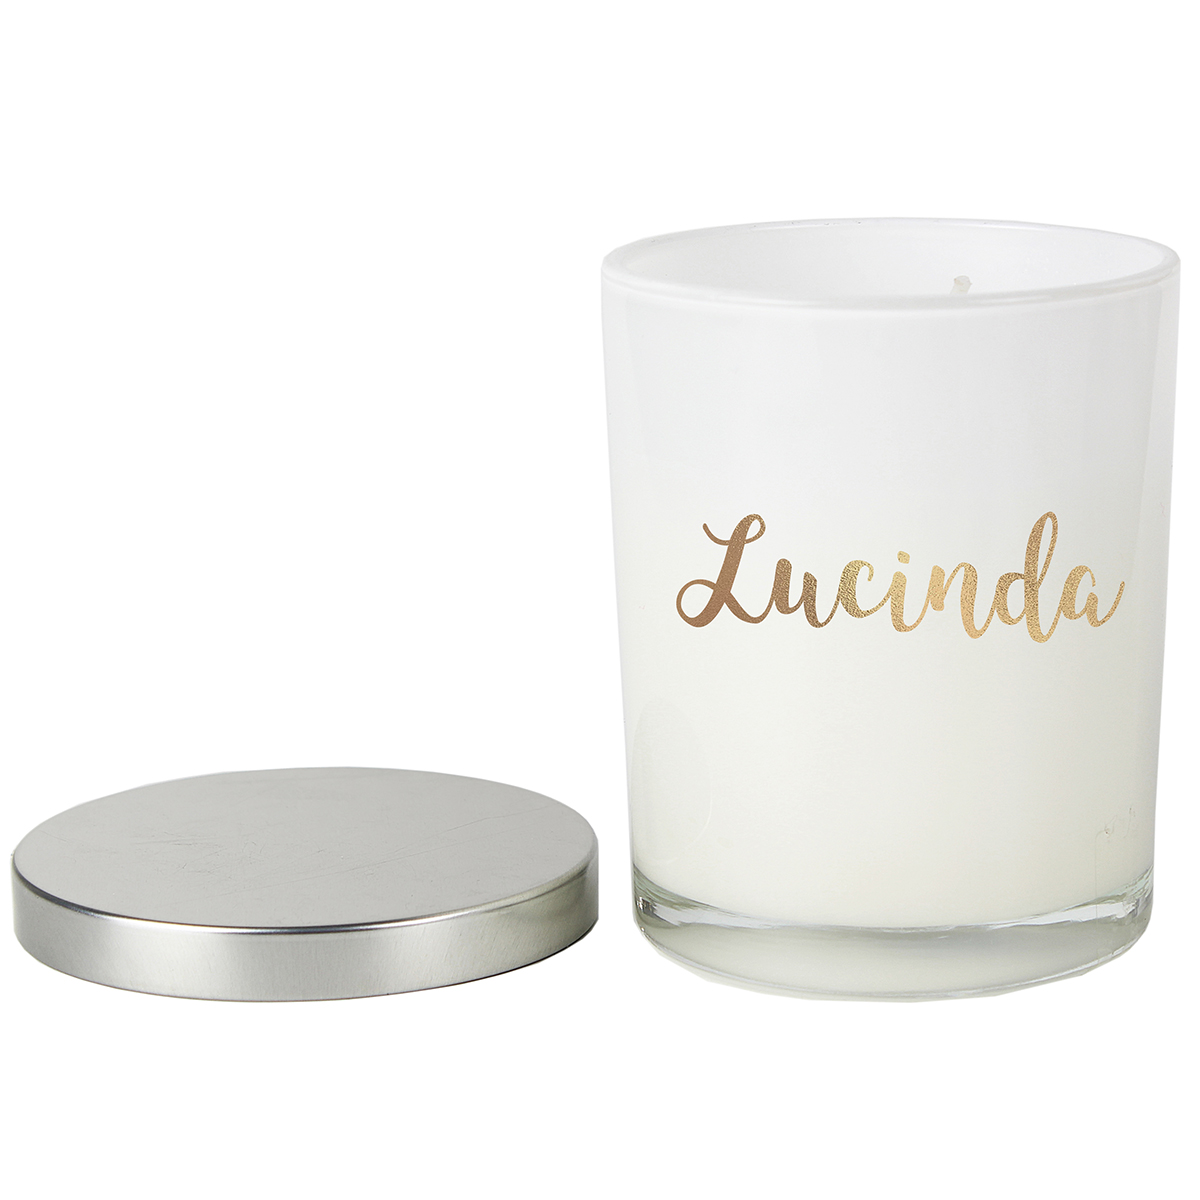 Personalised Candle - Metallic Gold Name